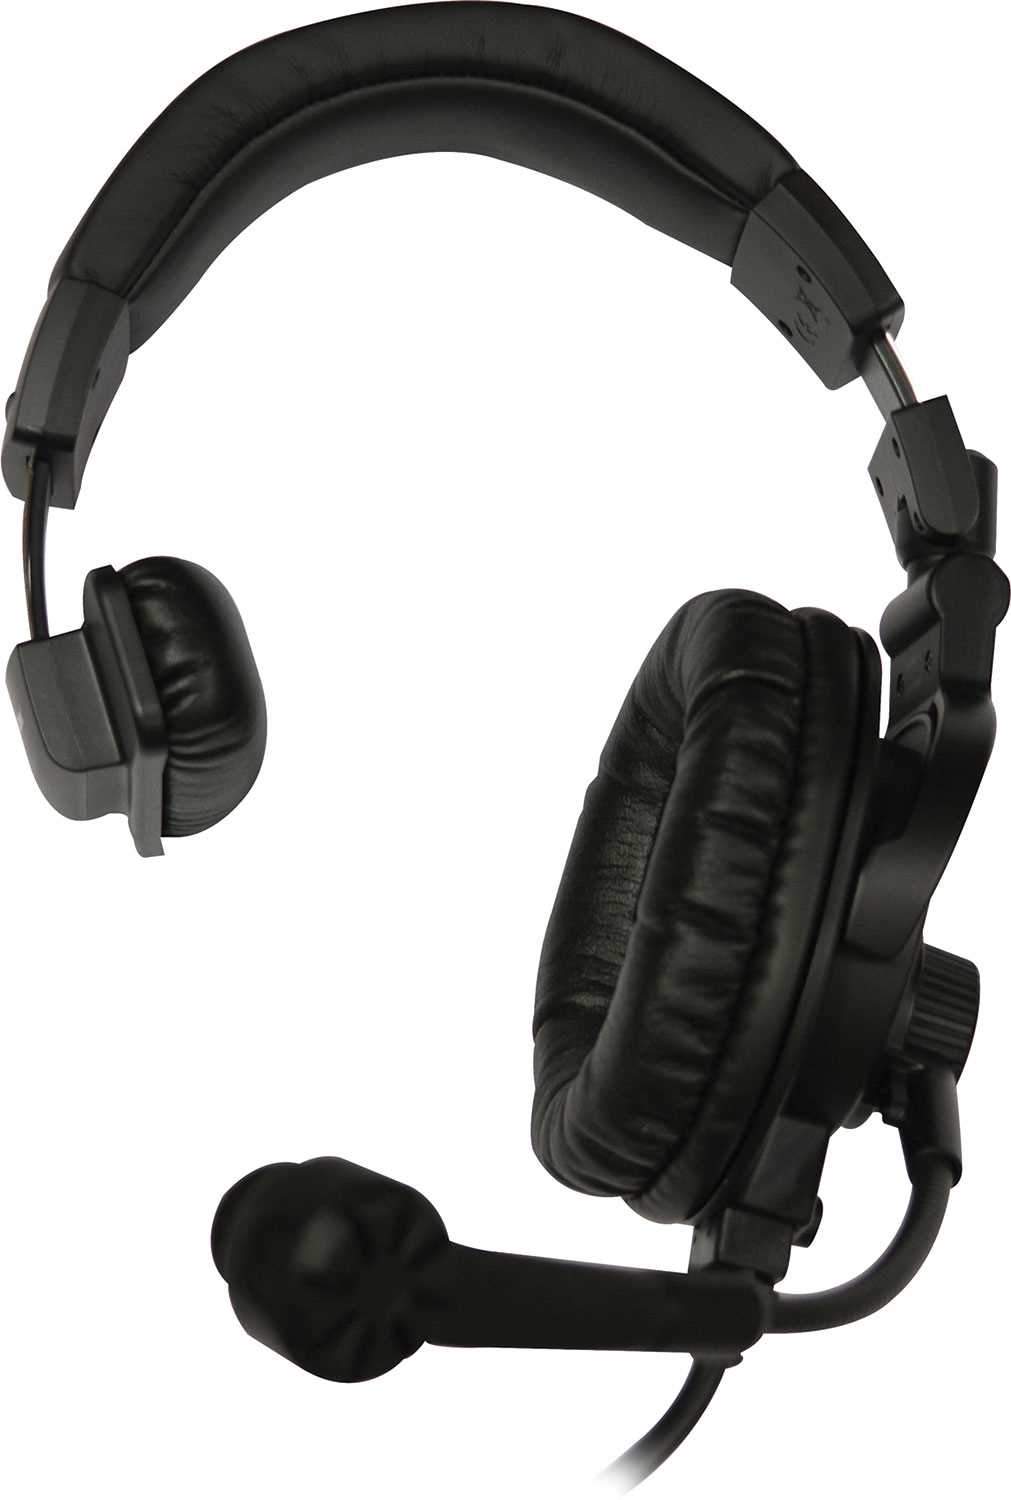 Clear-Com CC-300-X4 Single-Ear Standard Headset - ProSound and Stage Lighting